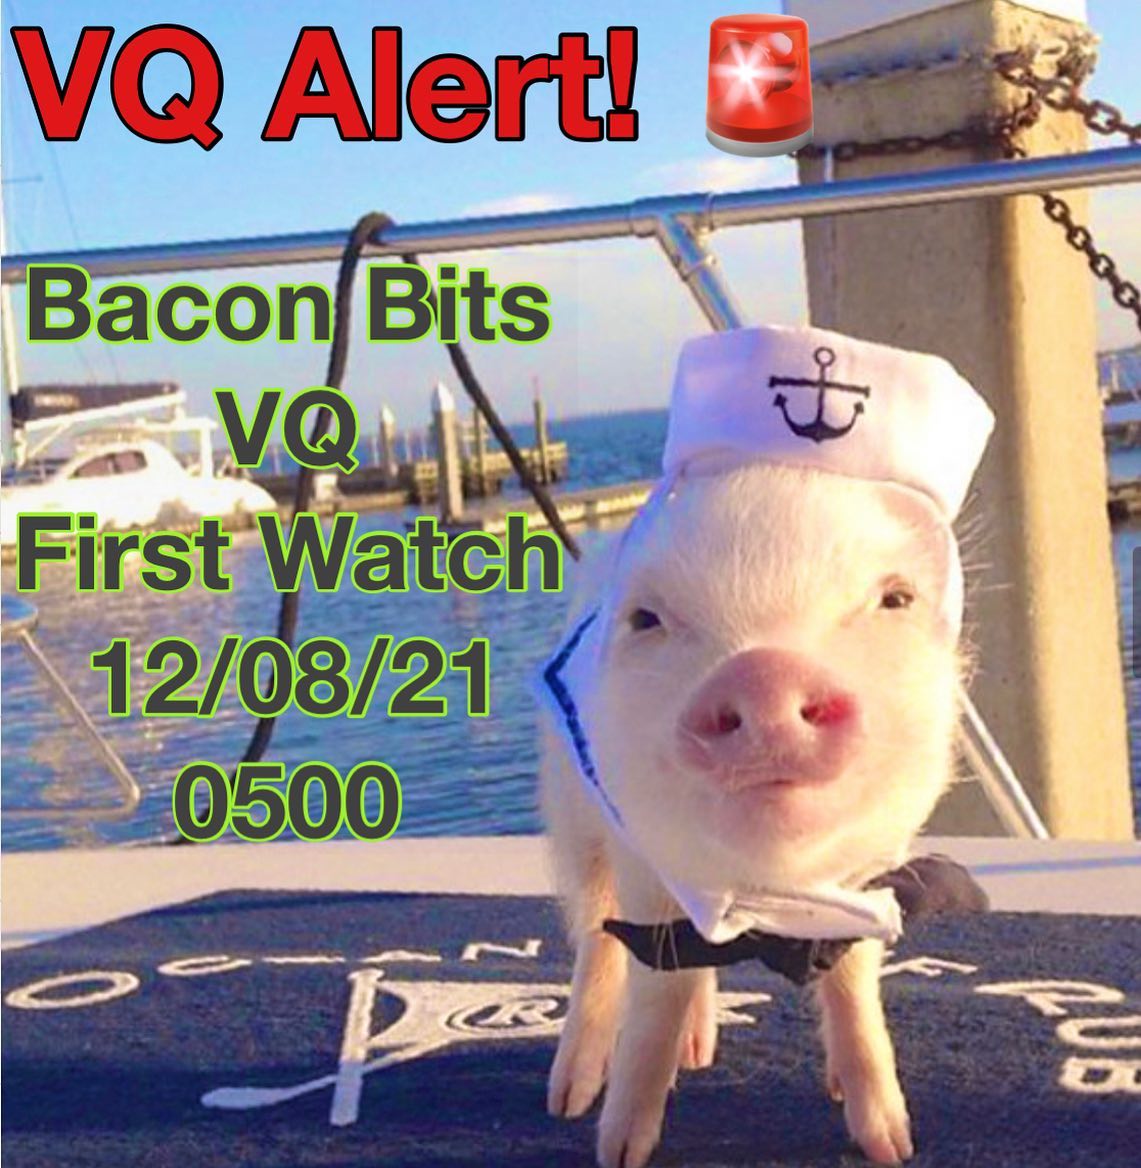 VQ Alert!!! 🚨 Bacon Bits is on the Q sheet for tomorrow at First Watch!  5:00 am at River Road Baptist Church. Come show your support!!